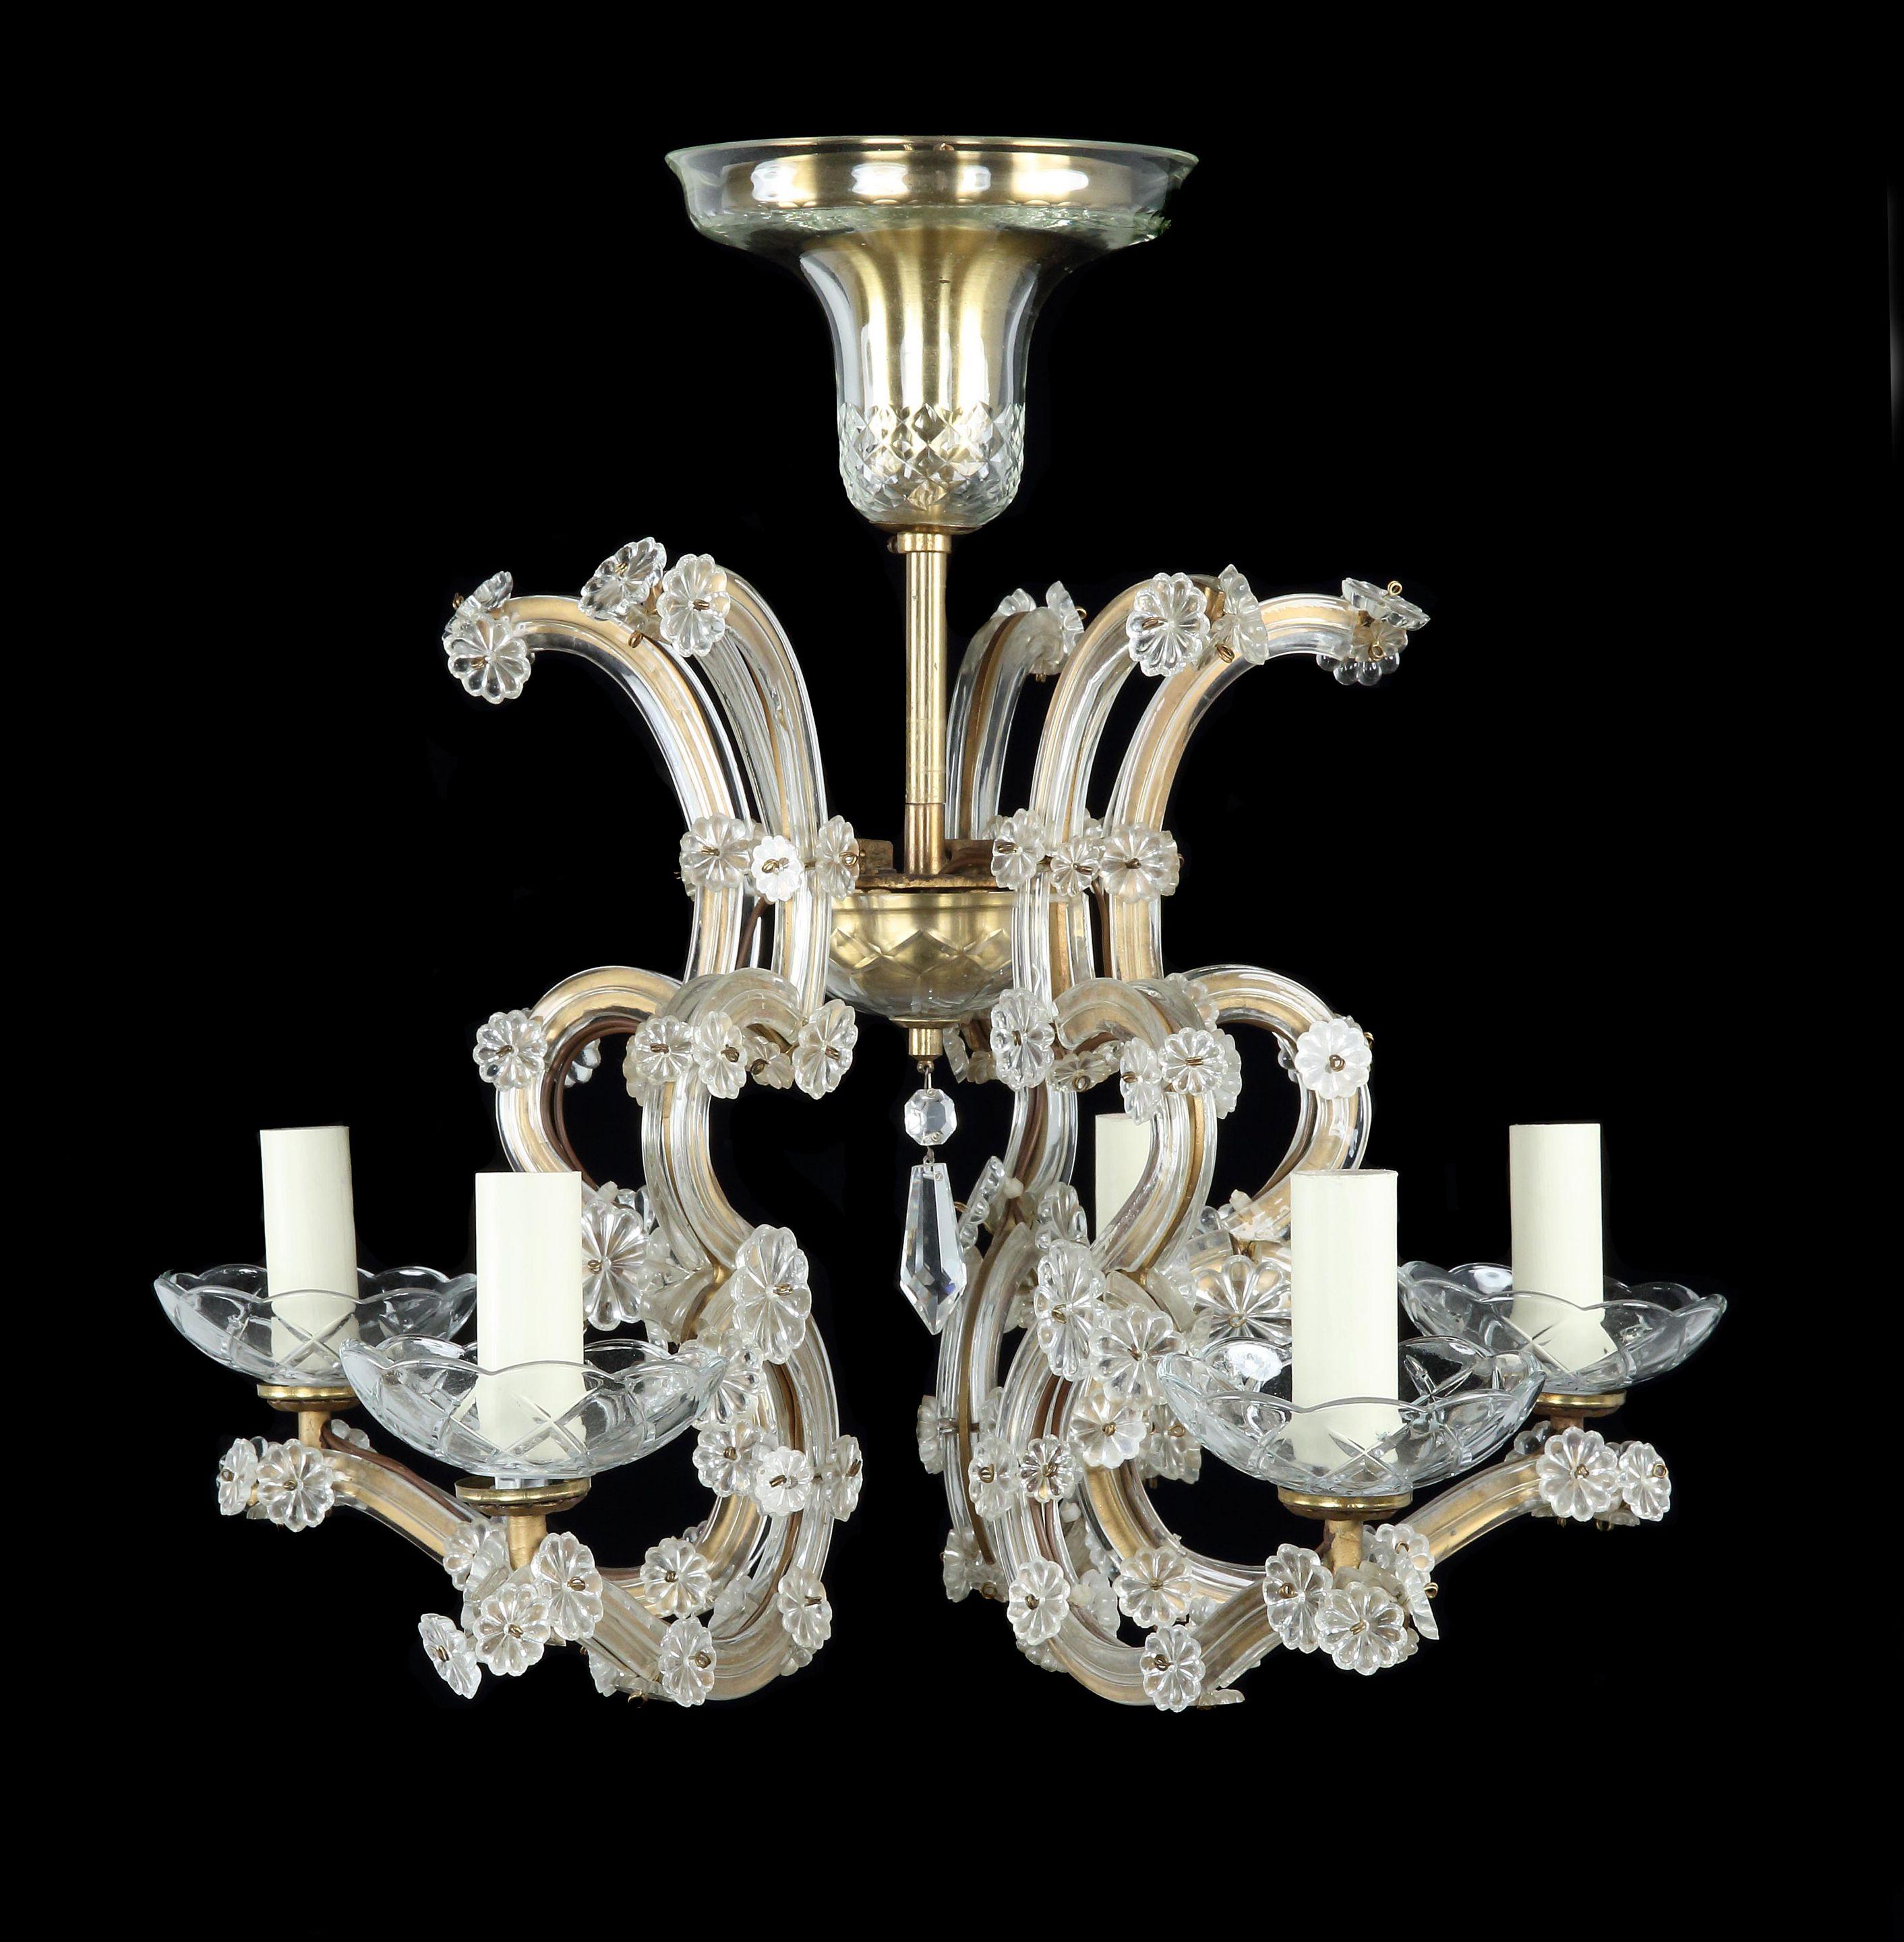 EDWARDIAN, 6-ARM, GILT-BRASS & GLASS CHANDELIER IN THE ROCOCO STYLE  17½ ” high

The lightness, elegance, and an exuberant use of curving and floral ornamentation are characteristic features of the Rococo period
The glass enhances the reflection of